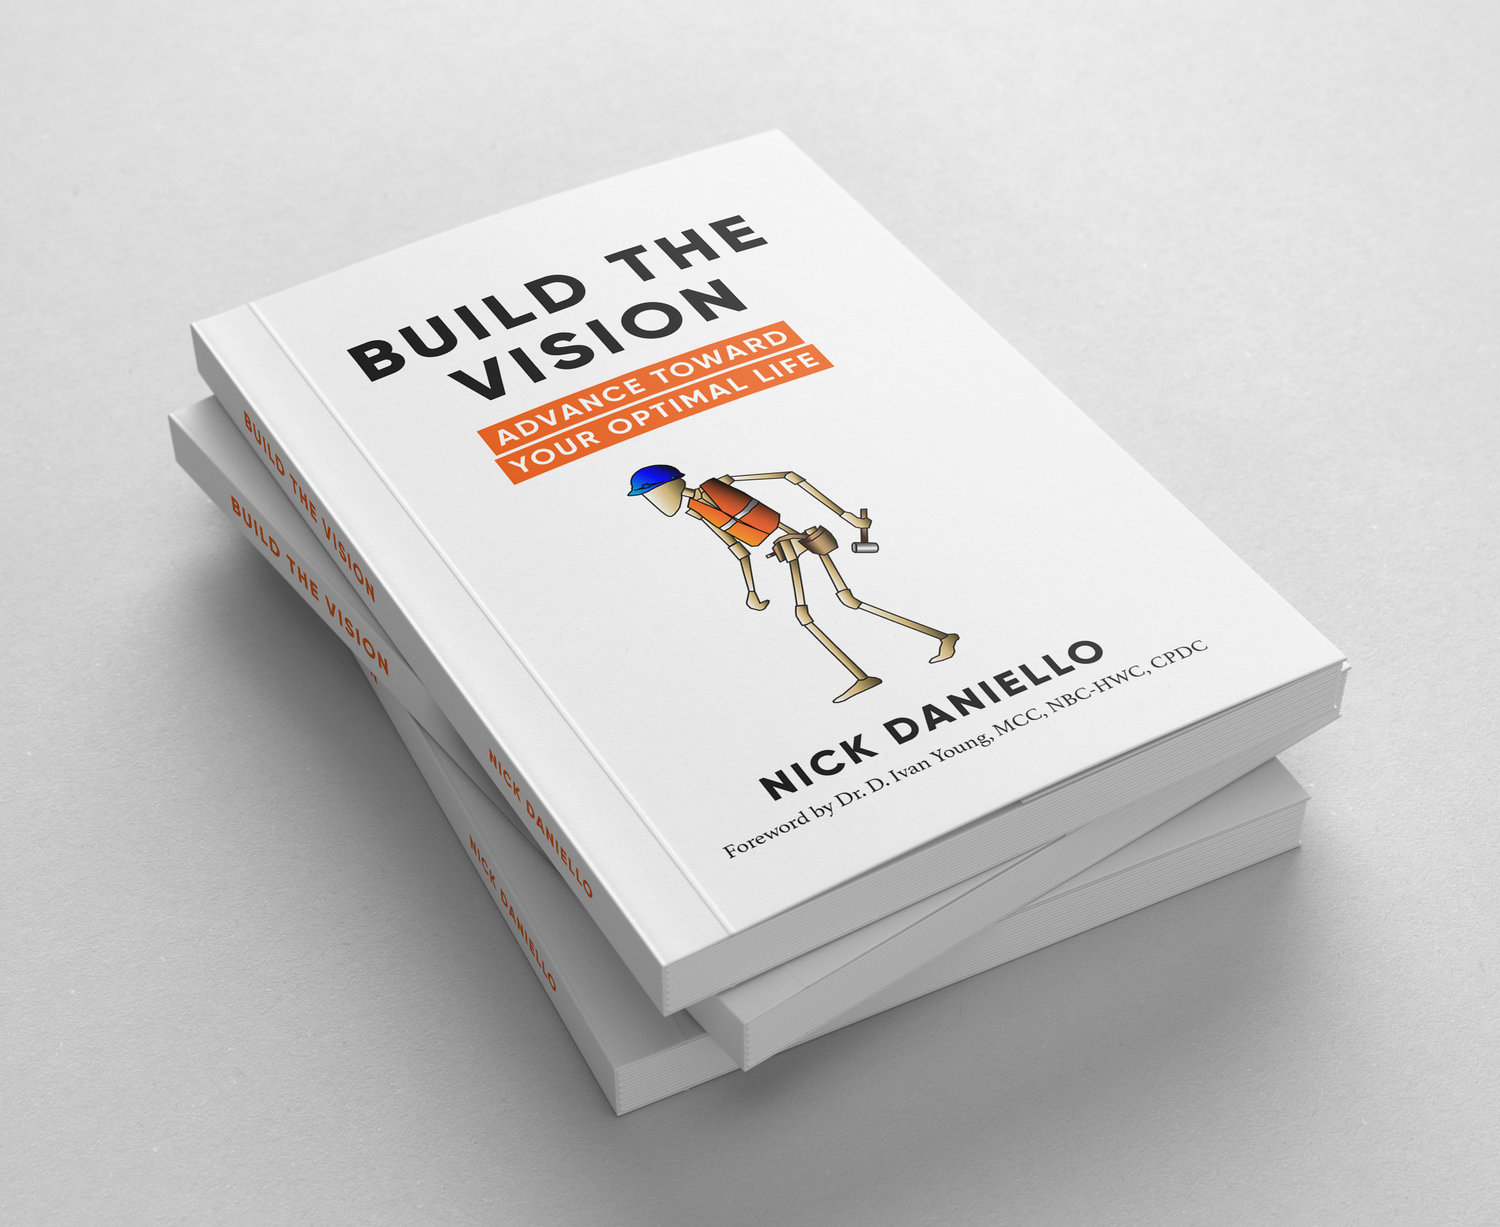 Rome native Nick Daniello has released his first book, “Build the Vision: Advance Toward Your Optimal Life” now available on Amazon.